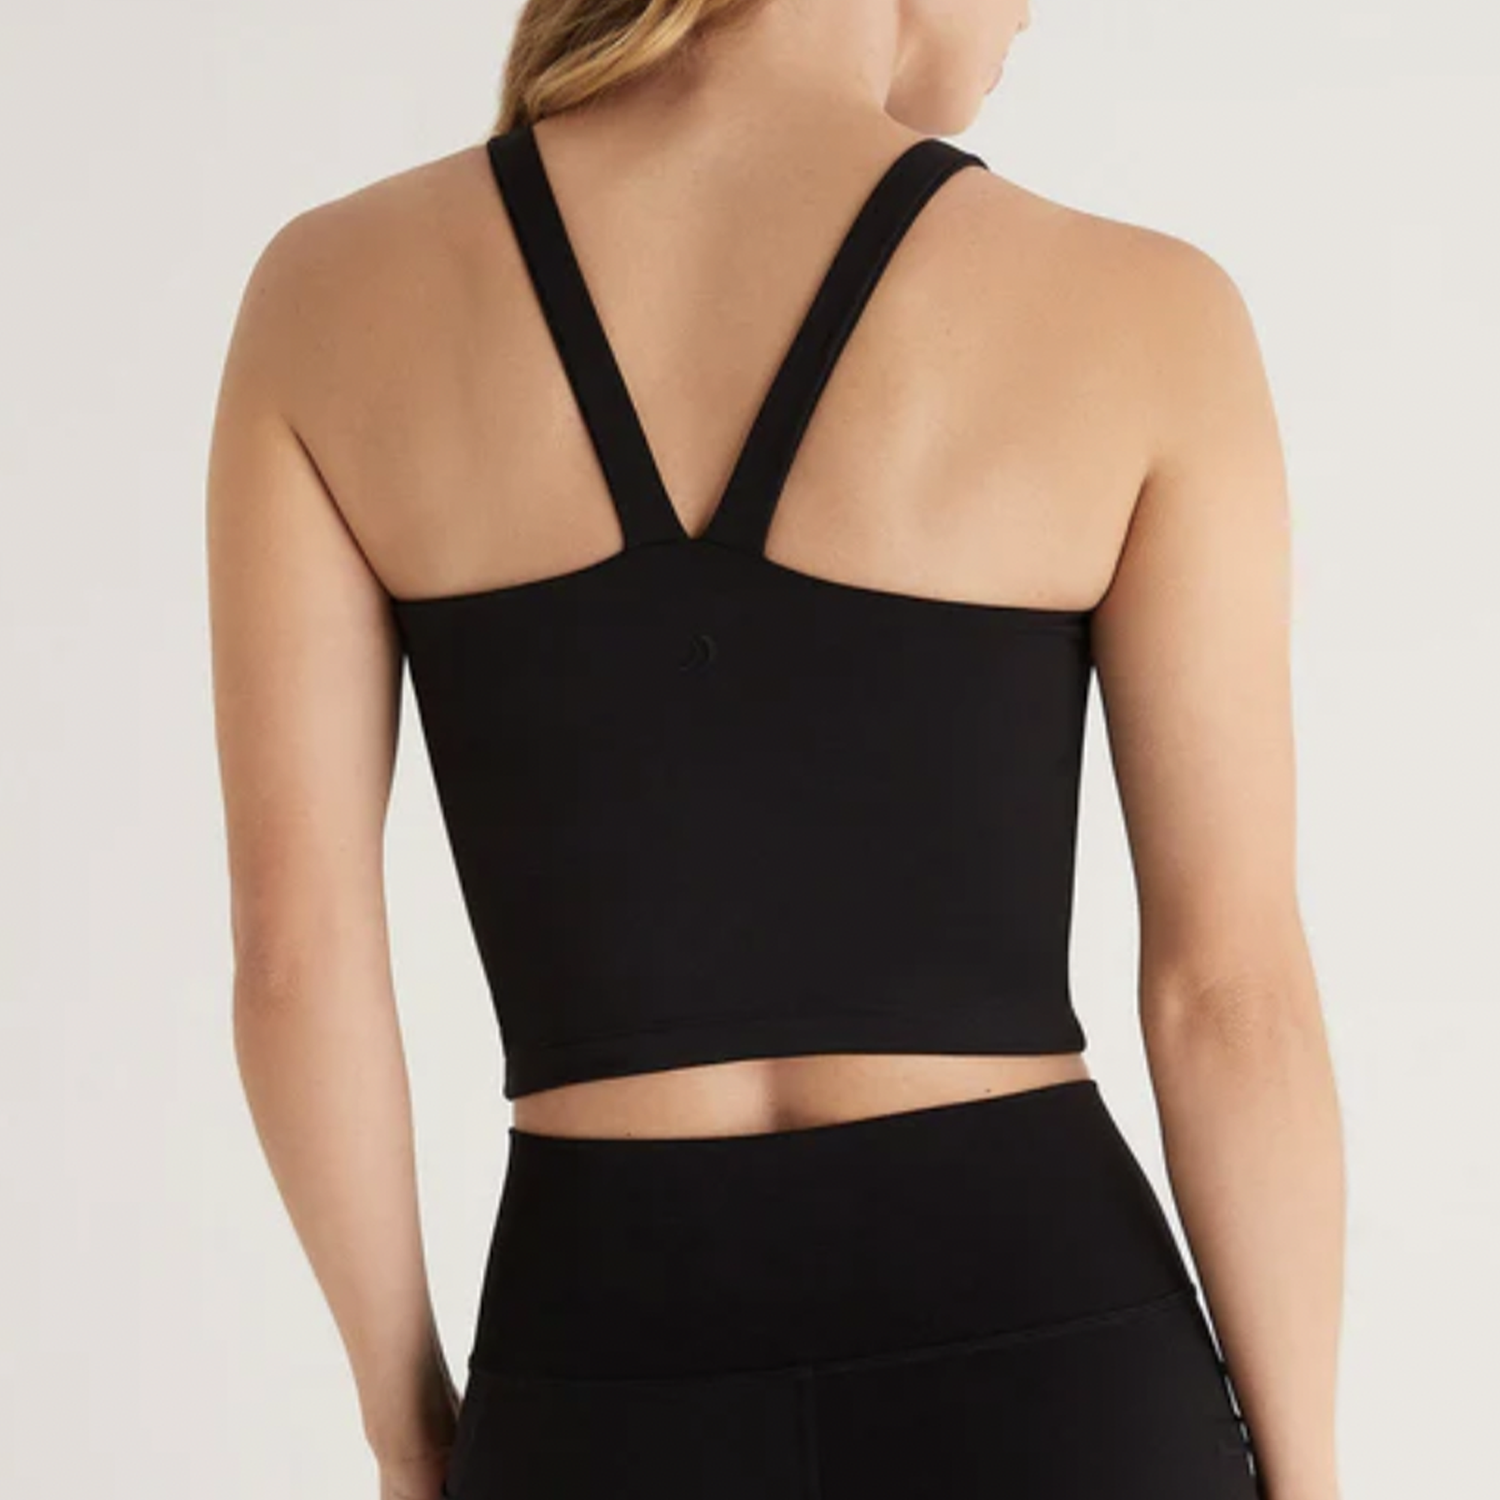 Z Supply Motivate Cropped Tank. Get moving in this Motivate Cropped Tank. Made in a breathable, super smooth nylon/spandex, this tank is smoothing and supportive, featuring a shelf bra with removable pads